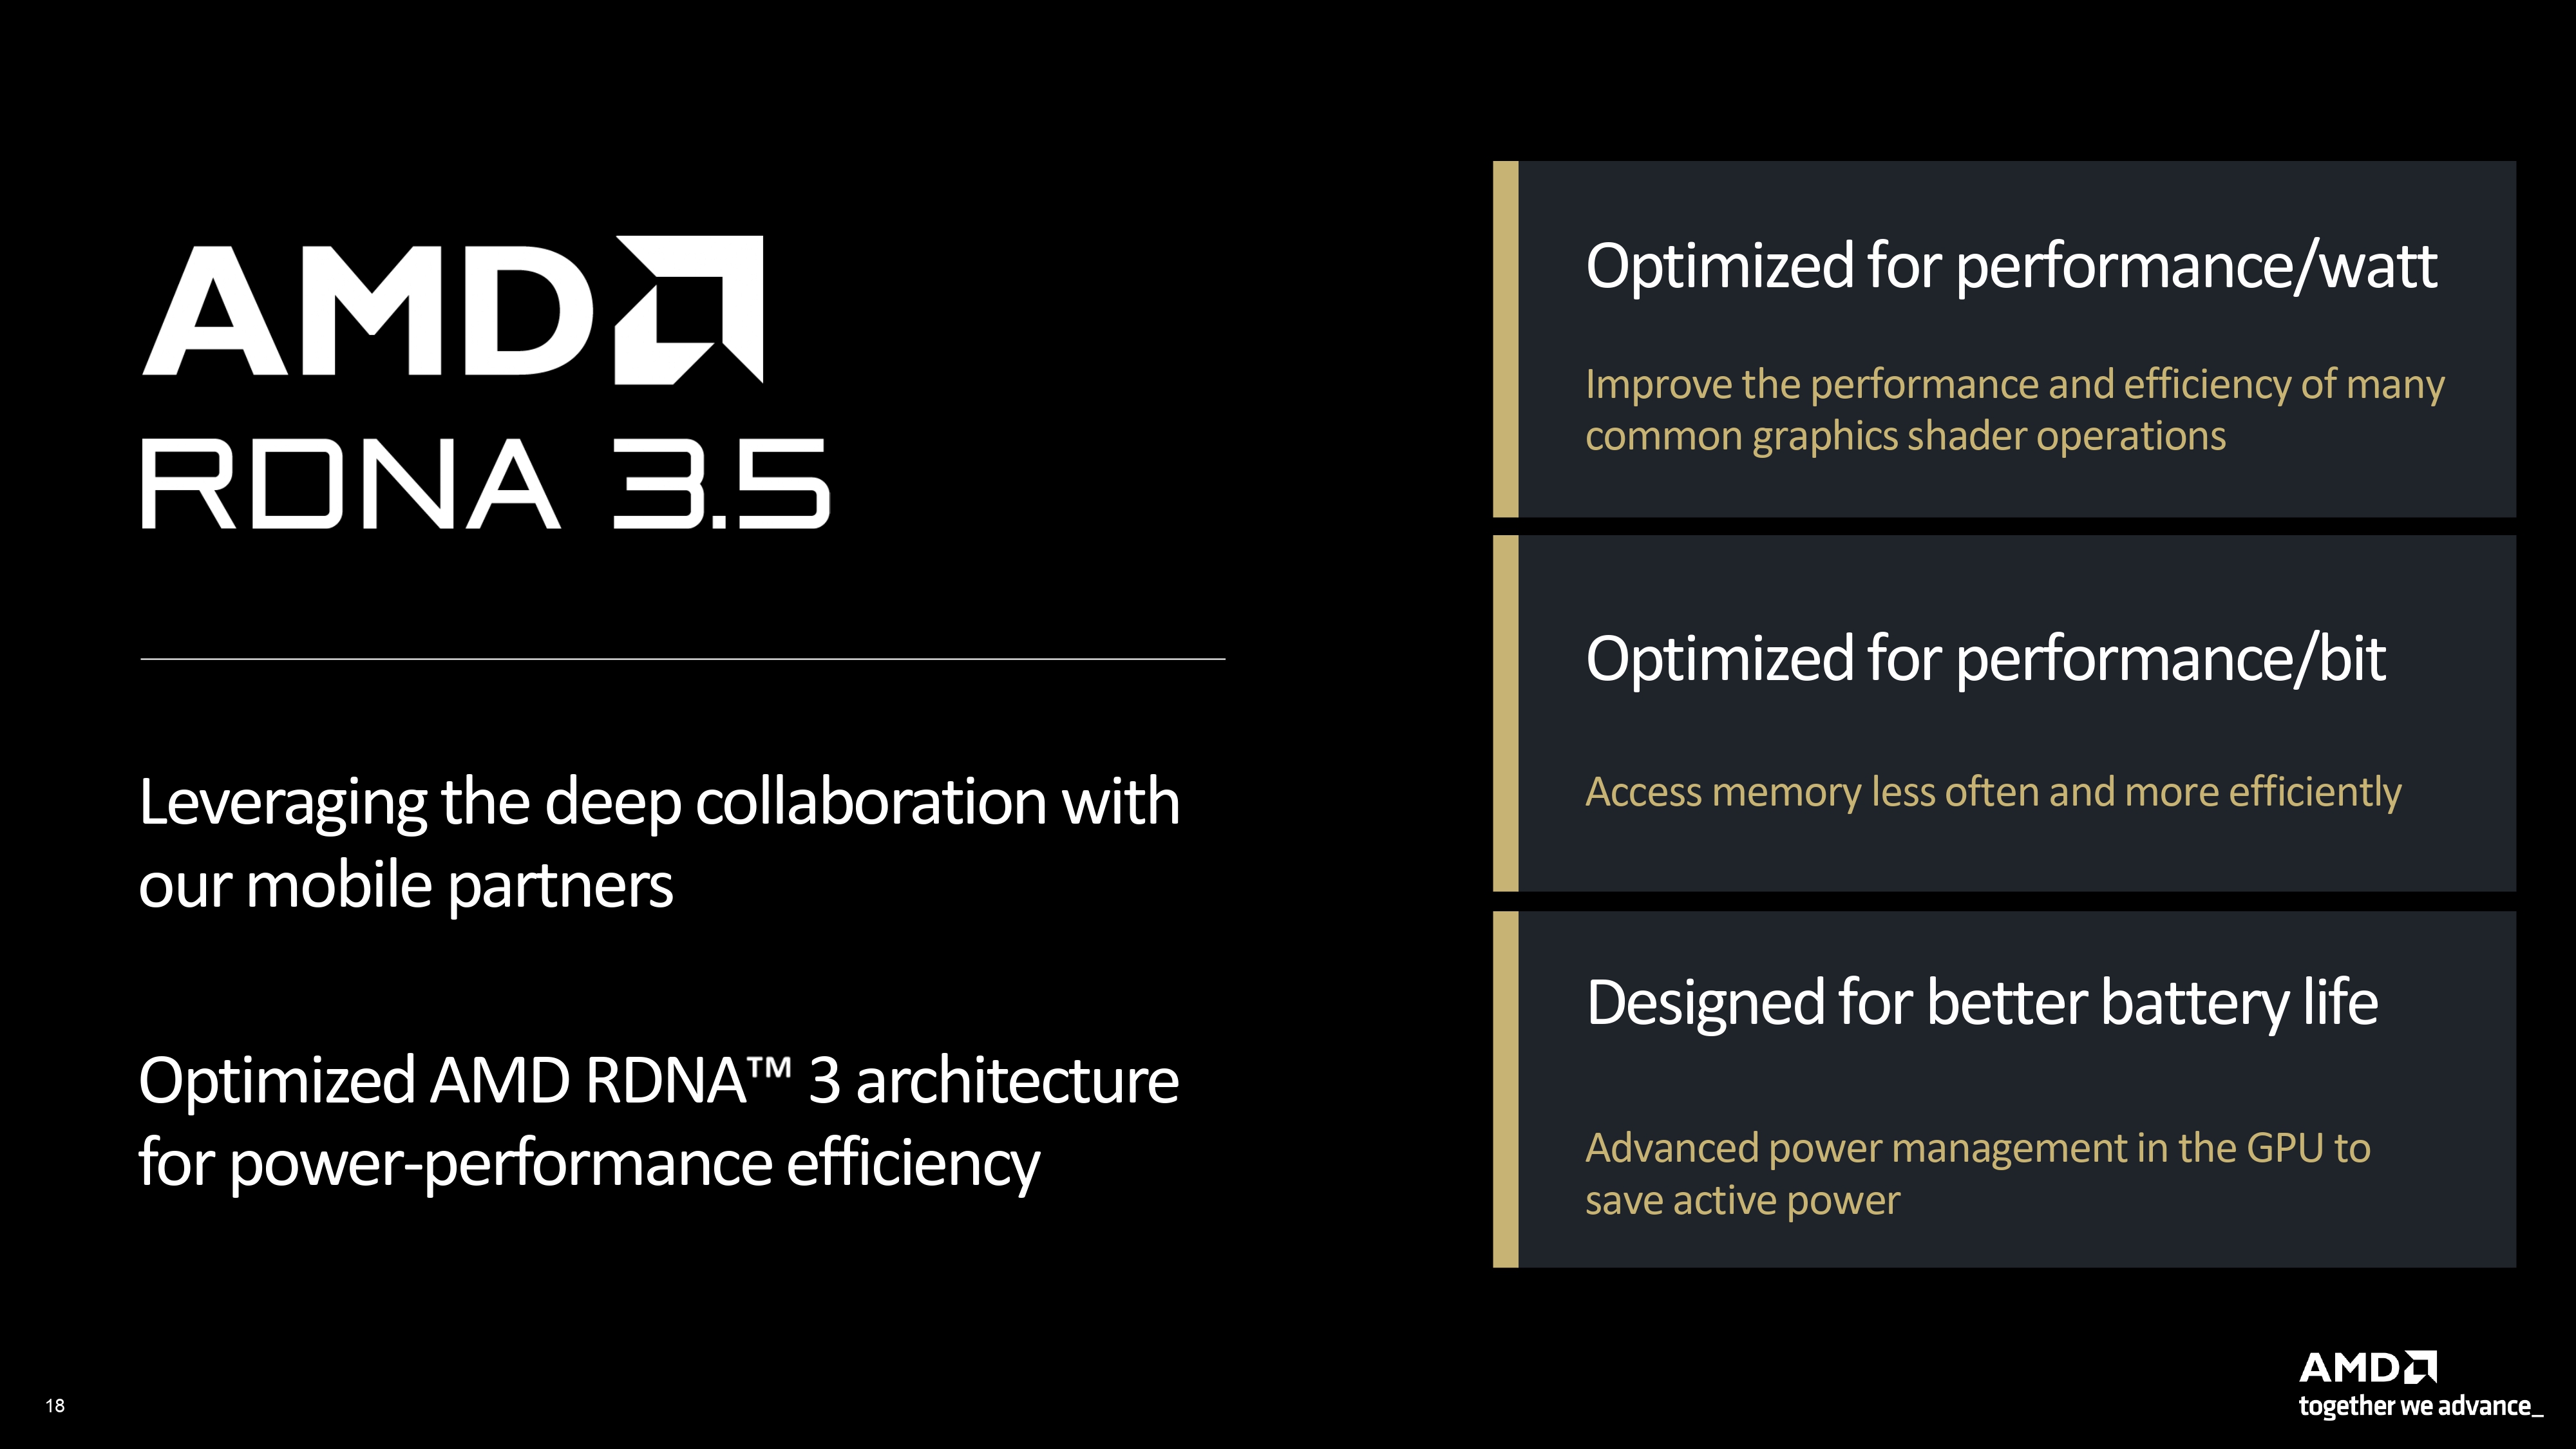 AMD presentation slides introducing the changes added to the RDNA 3.5 GPU architecture